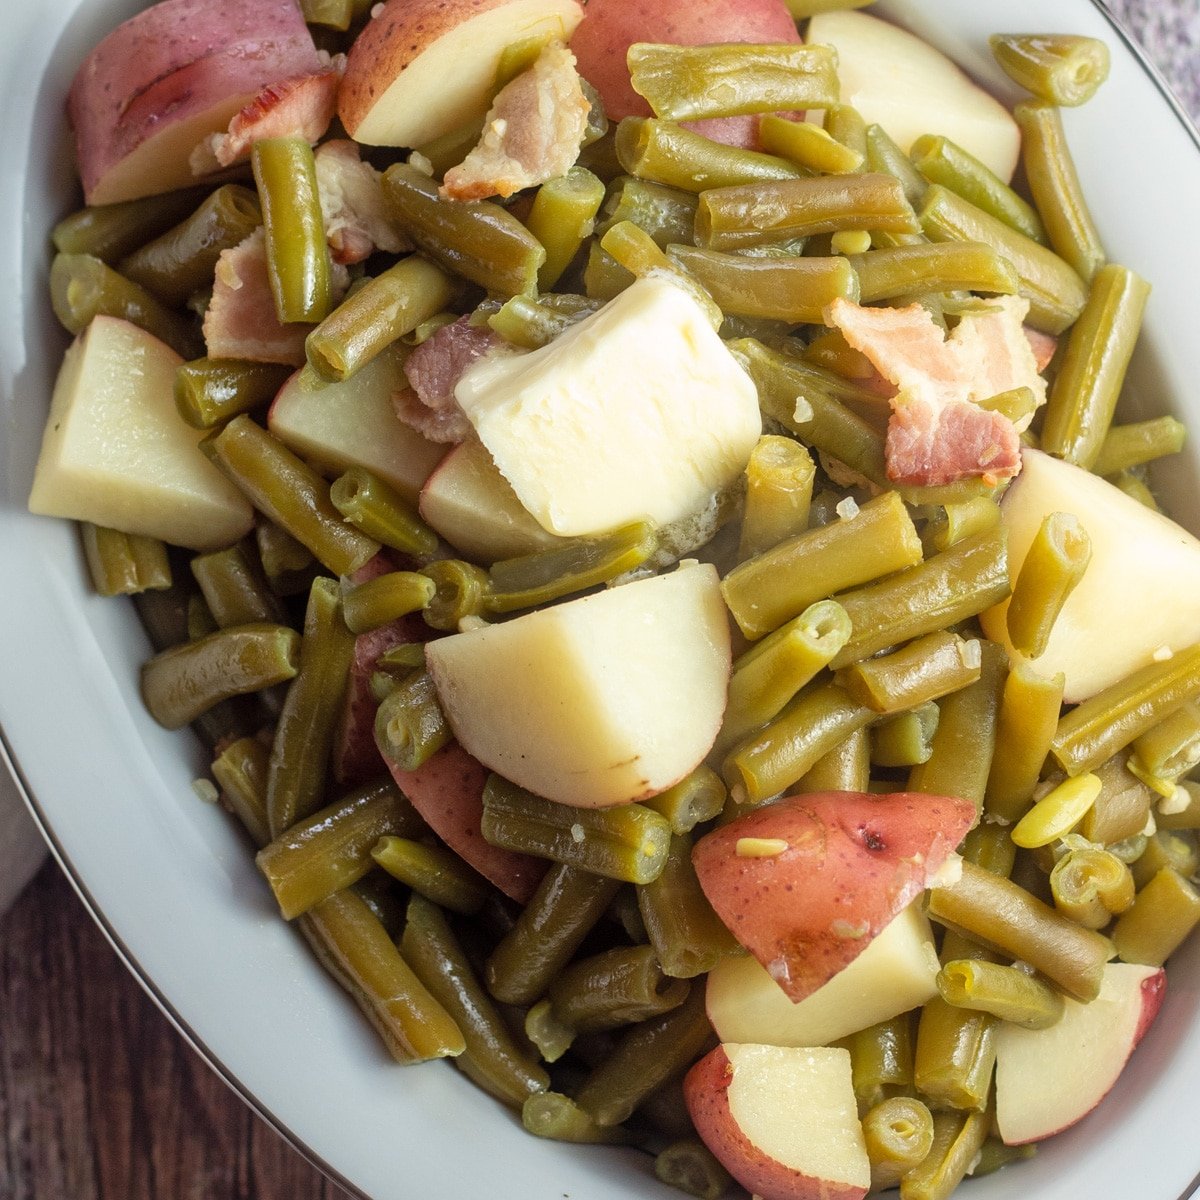 https://bakeitwithlove.com/wp-content/uploads/2022/03/crock-pot-green-beans-and-potatoes-sq1.jpg